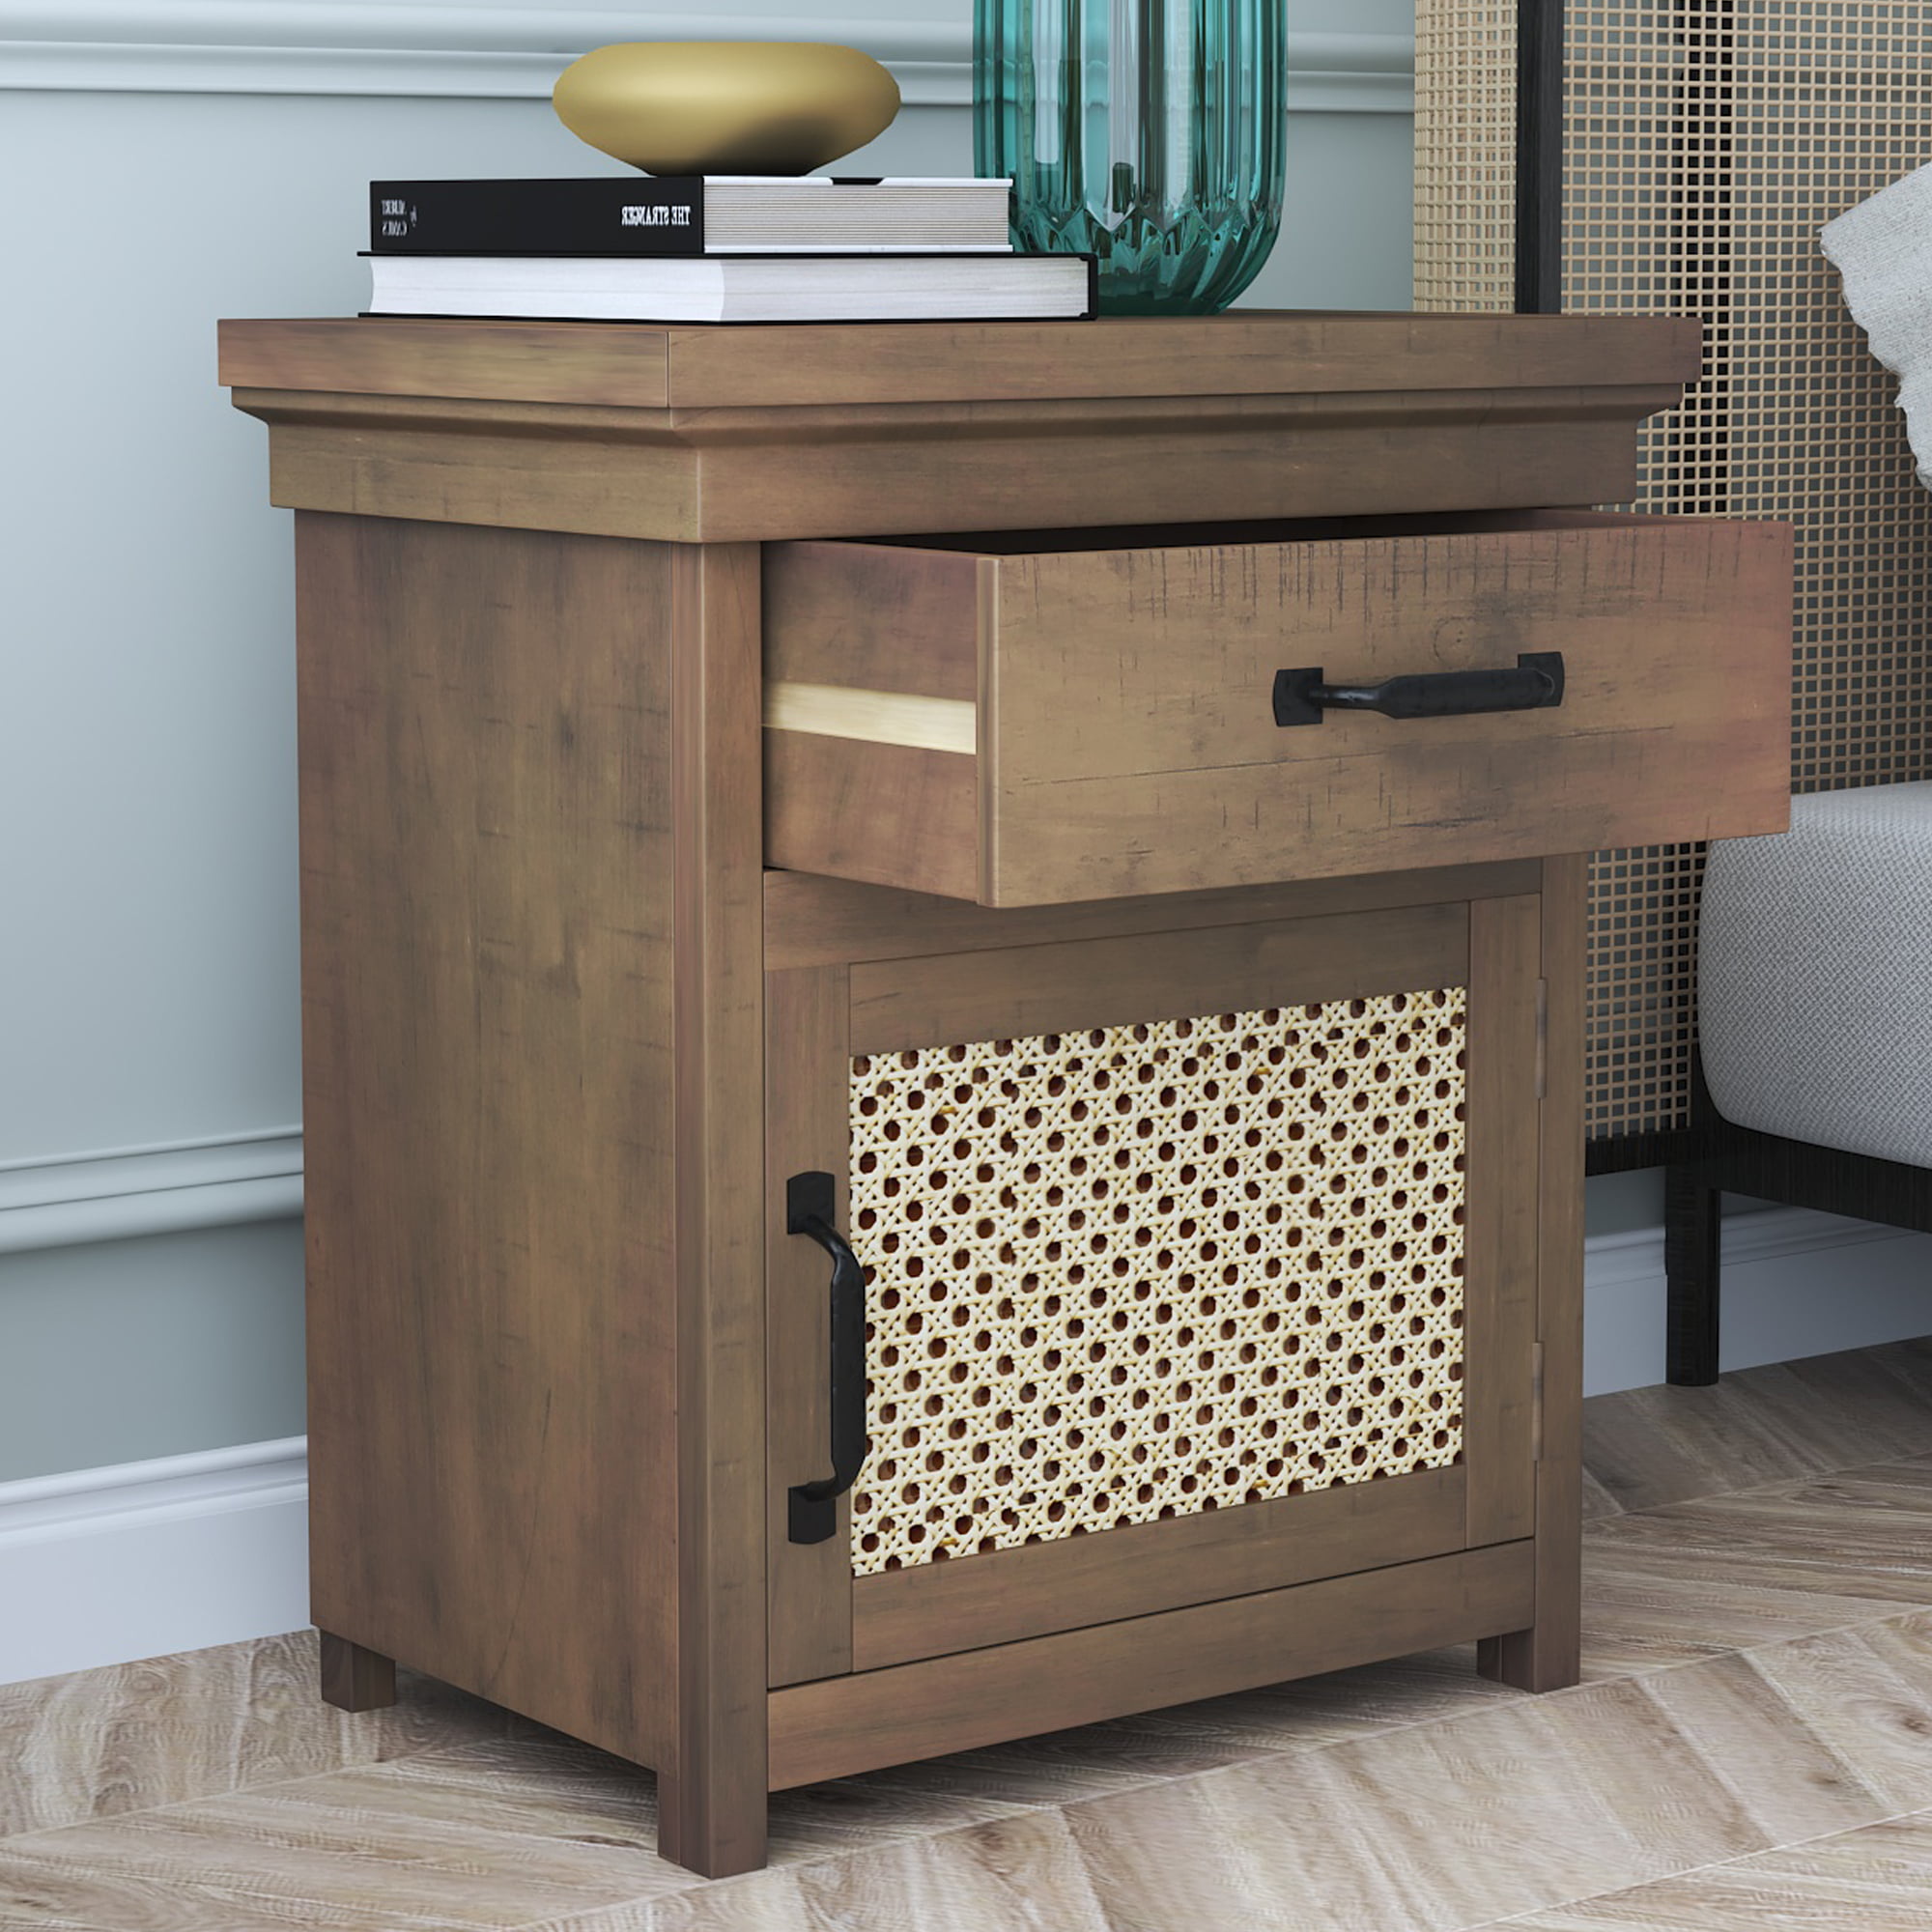 Handmade Rustic Bedside Cabinet Solid Pine Wood /11 colors available 